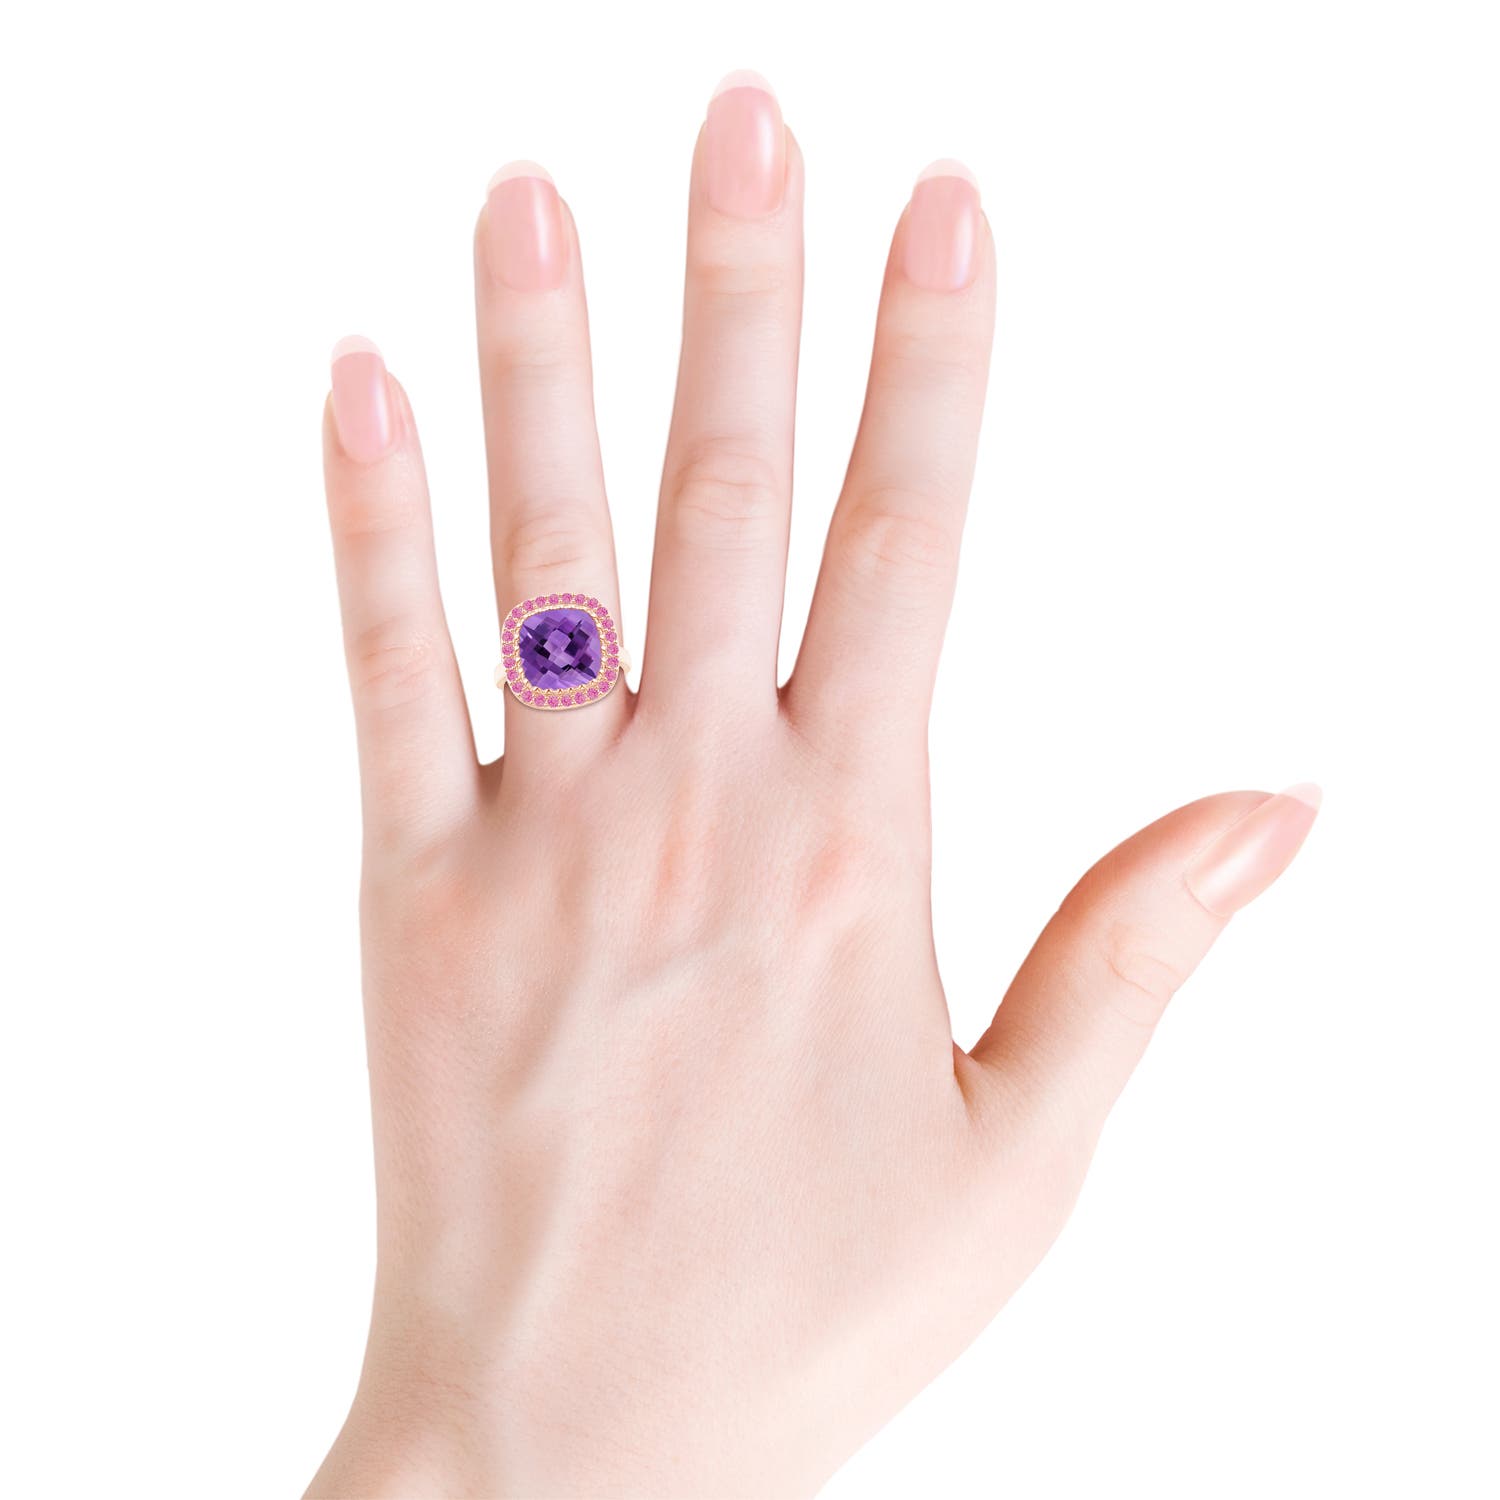 AA - Amethyst / 5.4 CT / 14 KT Rose Gold